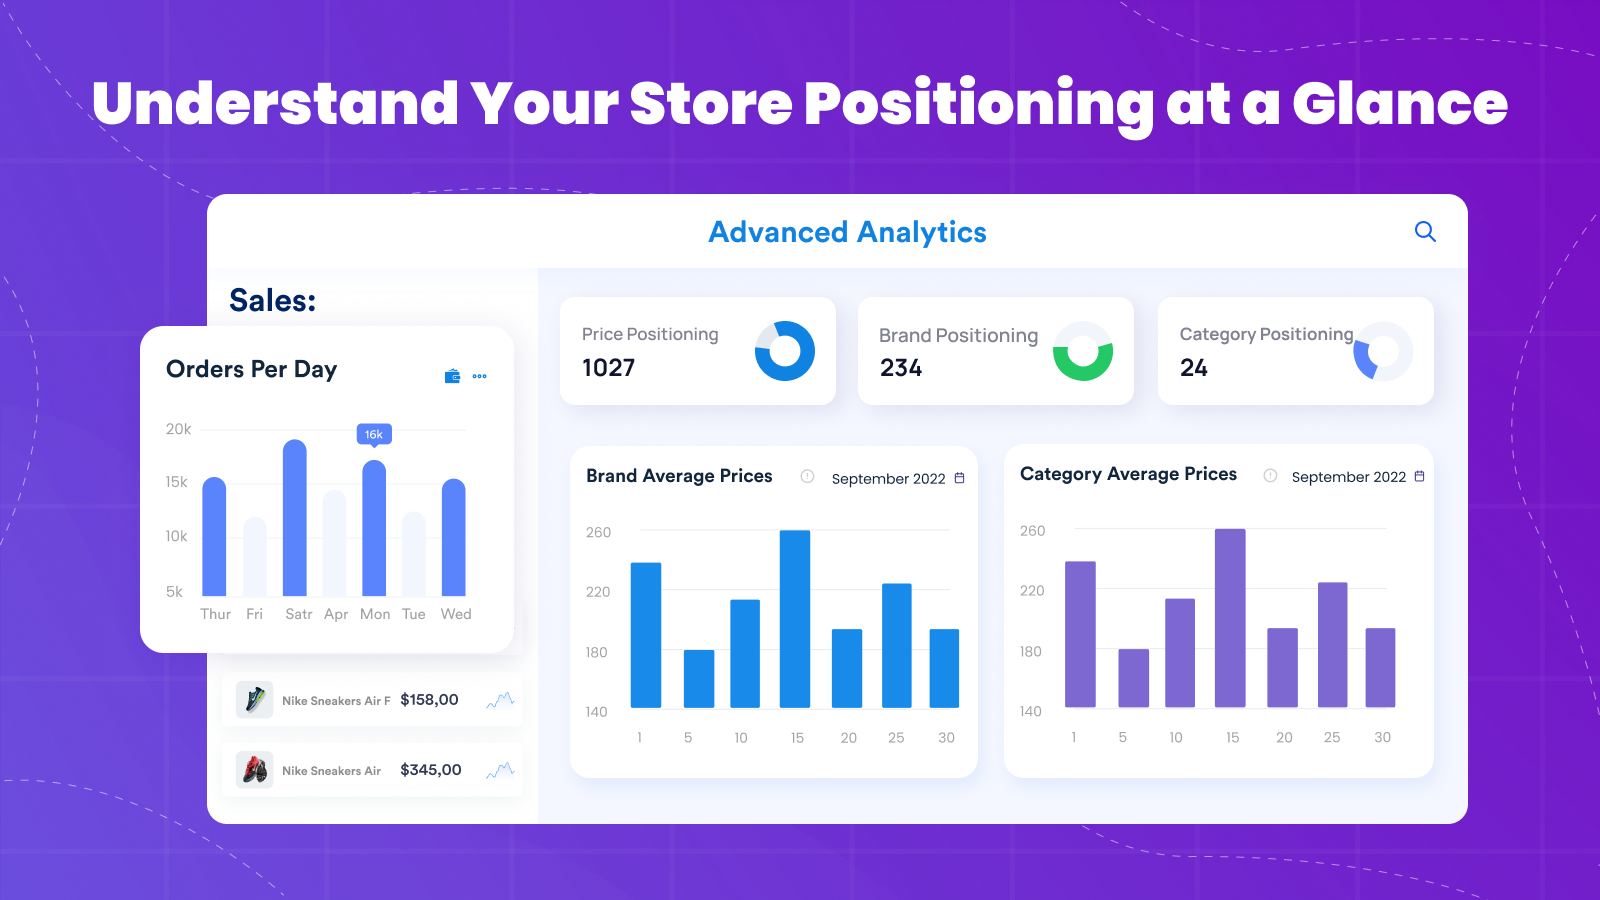 Understand yousr store positioning at a glance